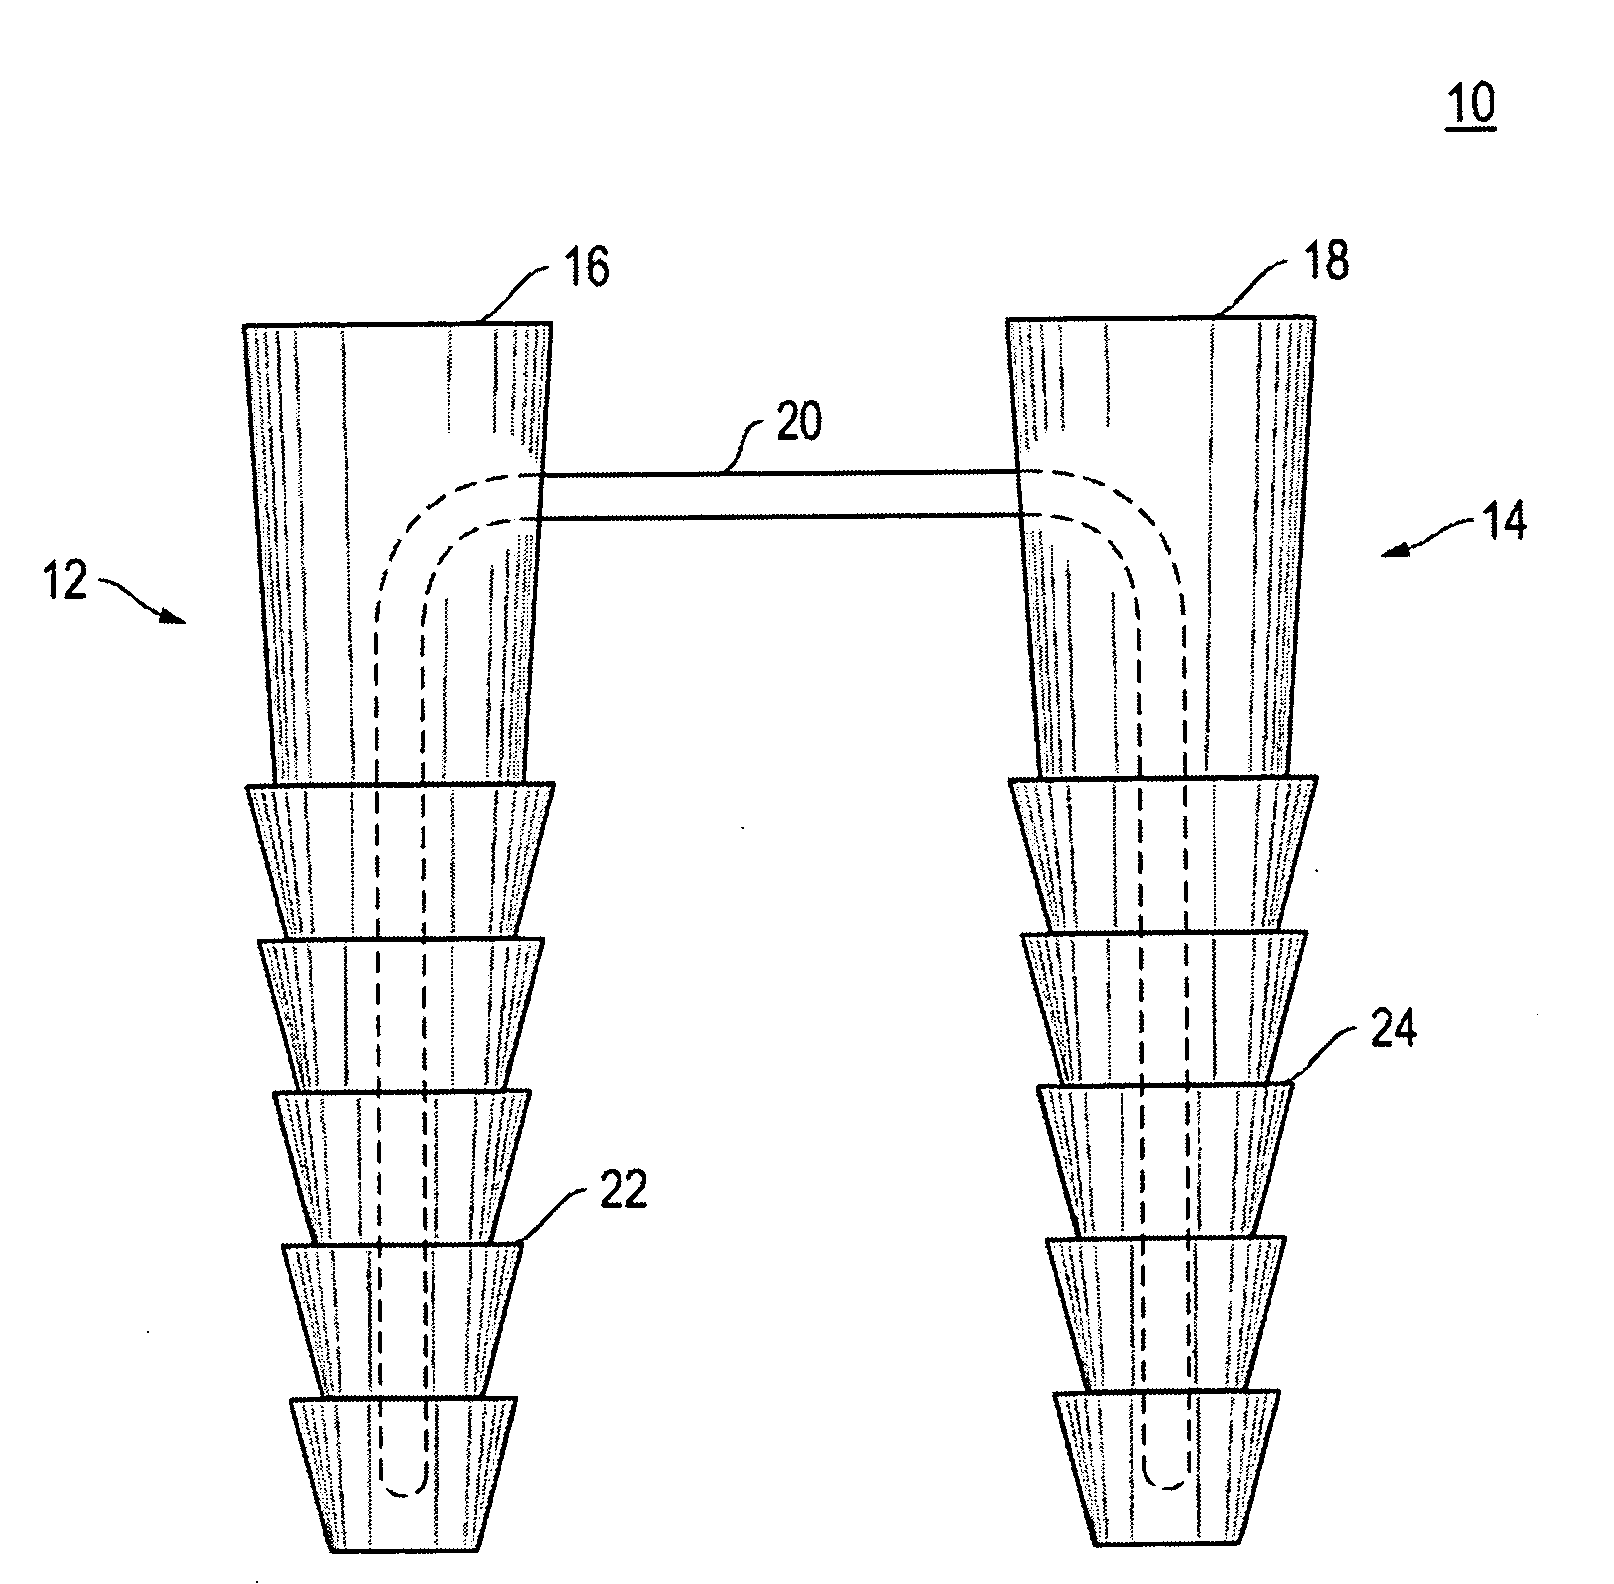 Kit Containing Combination Absorbable Staple and Non-absorbable Suture, And Method Of Using Same